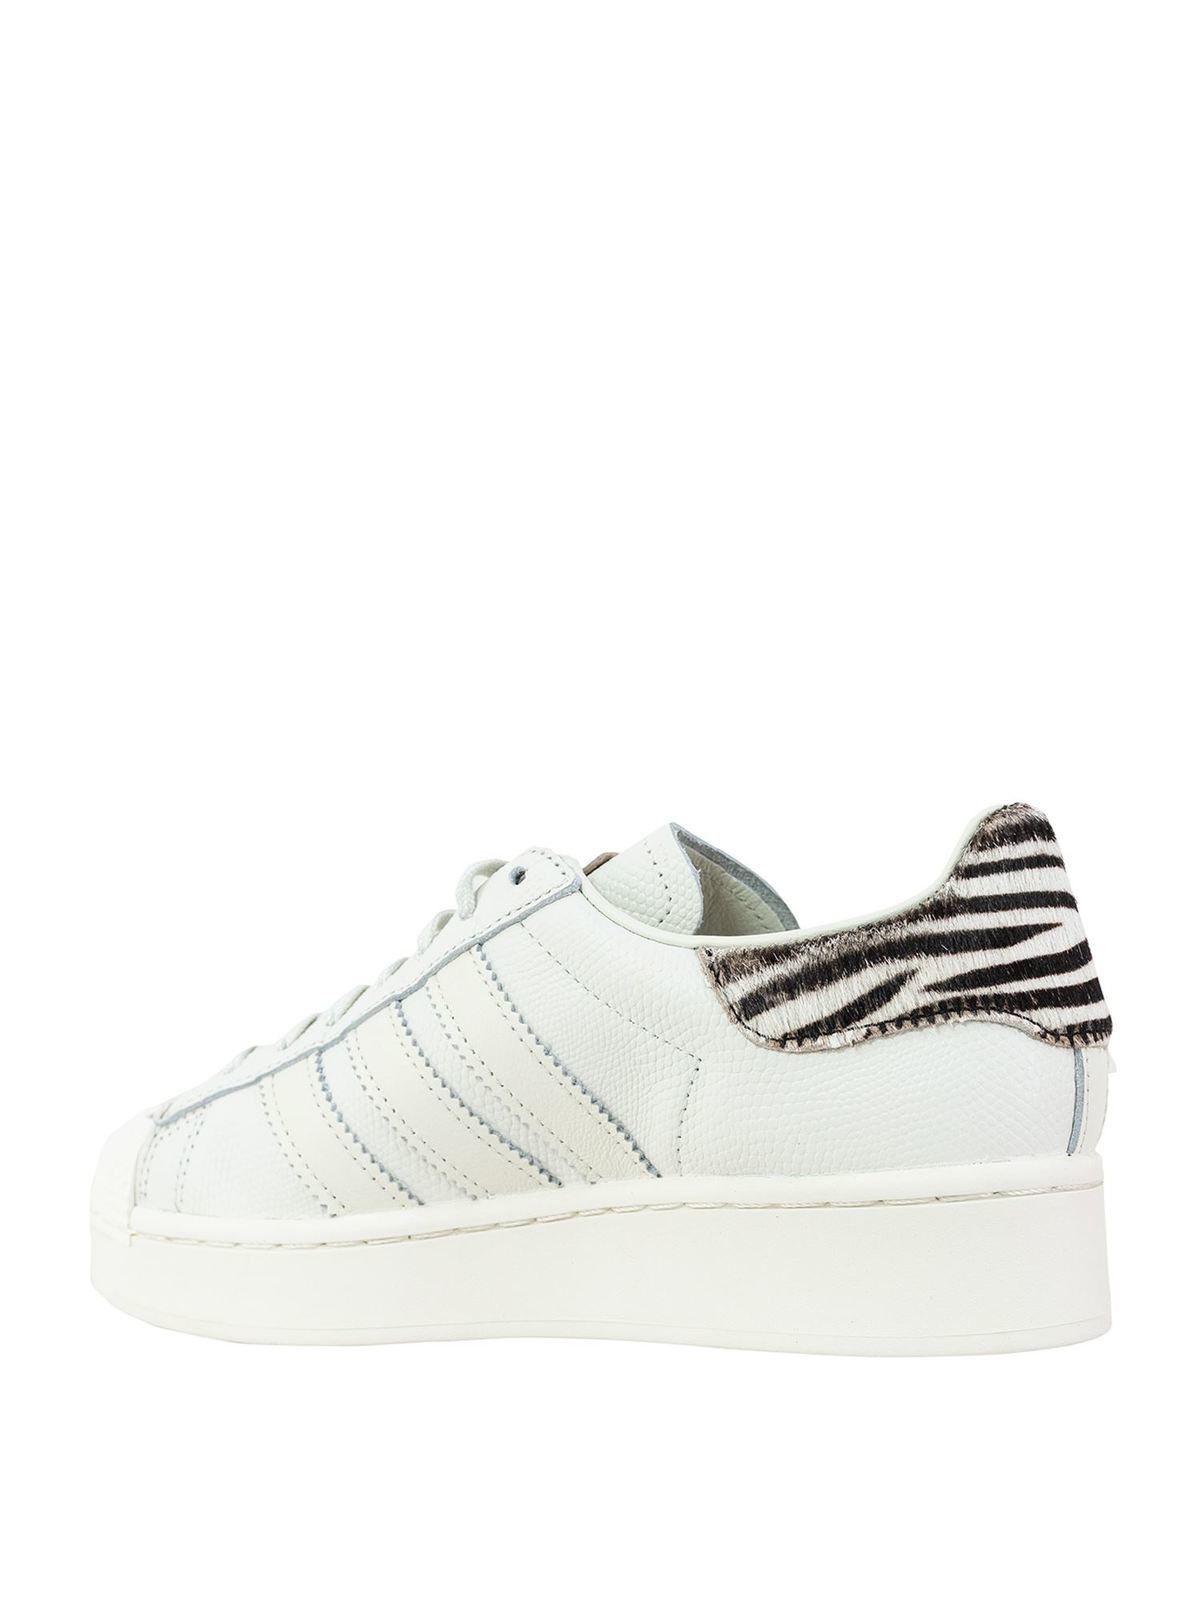 excelleren Overwinnen fiets Trainers Adidas Originals - Superstar Bold sneakers in white and animalie -  FV3458